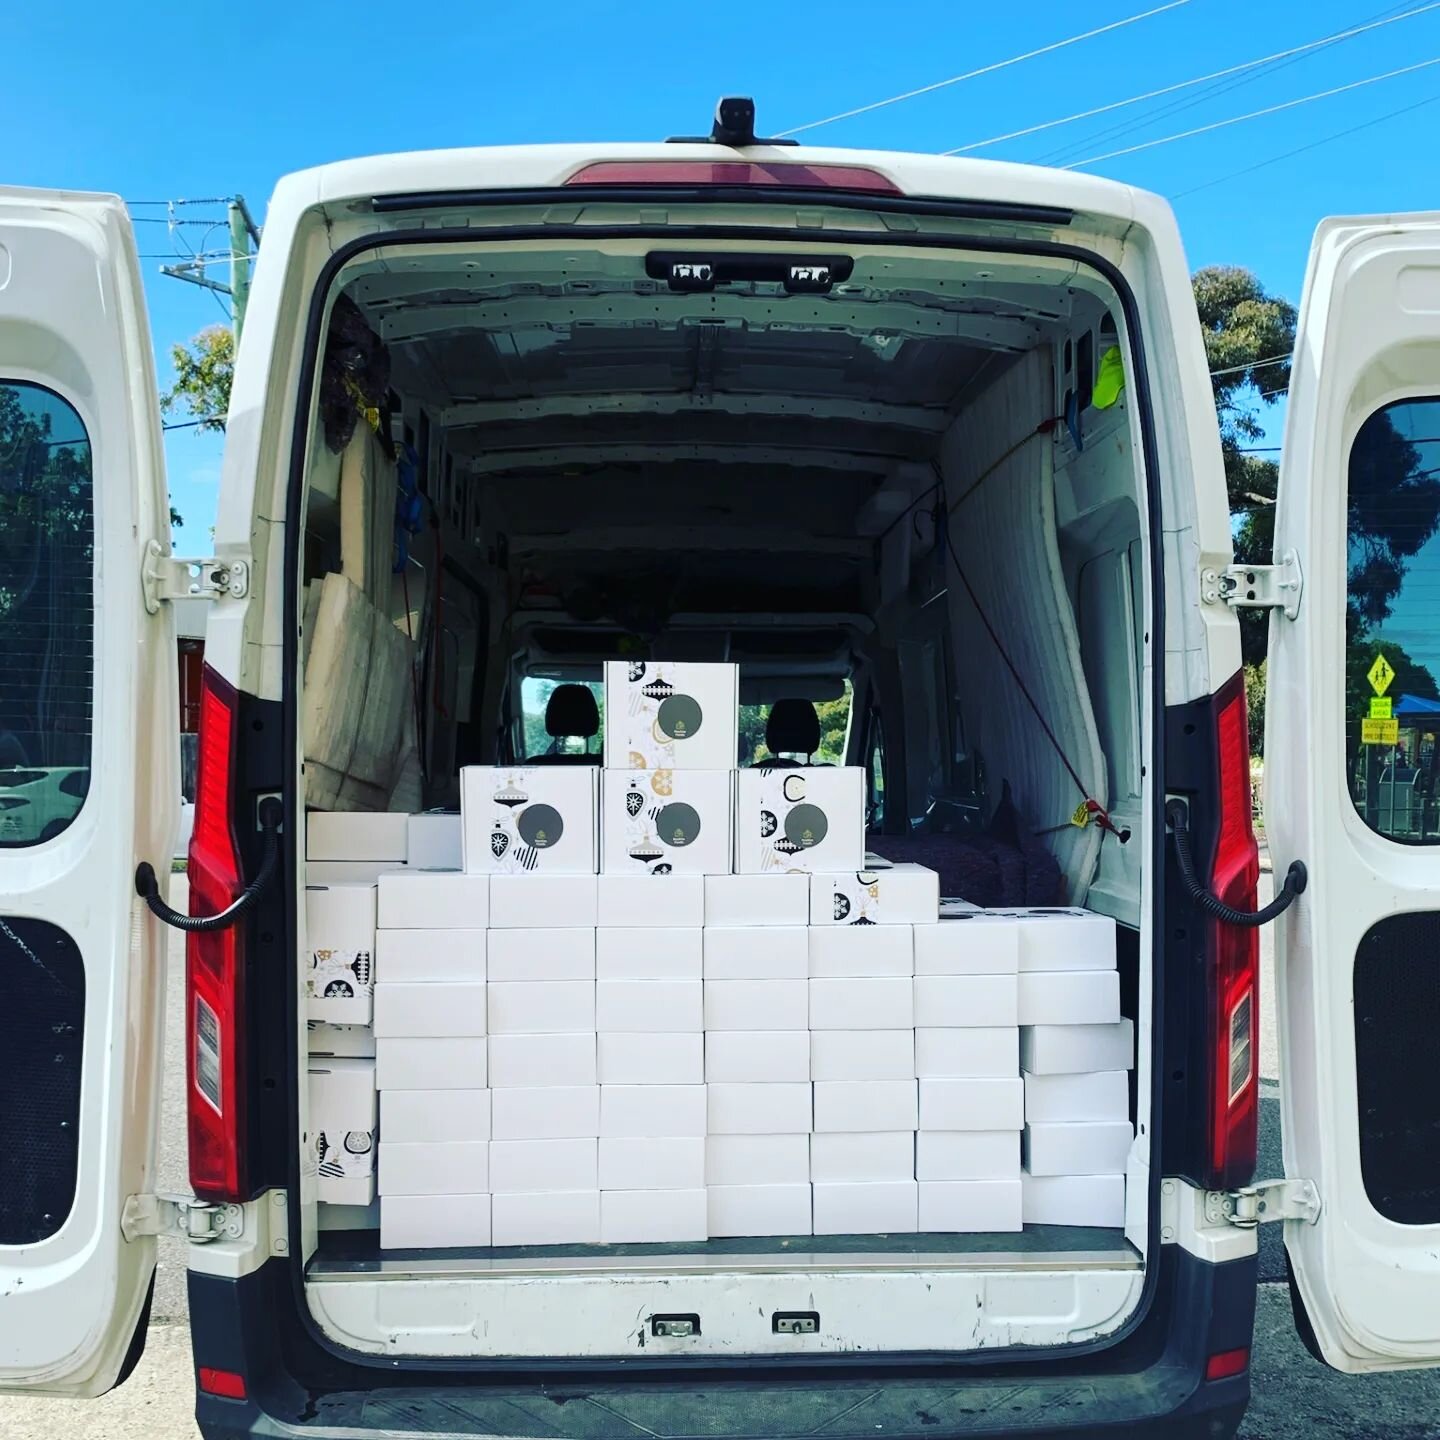 Another big delivery going out yesterday for some very lucky teachers. As we all know, our teachers are unsung heroes and deserve all the thanks in the world!
Featuring sweet deliciousness  from some of our local favourites 
@springhill_farm 
@wonder